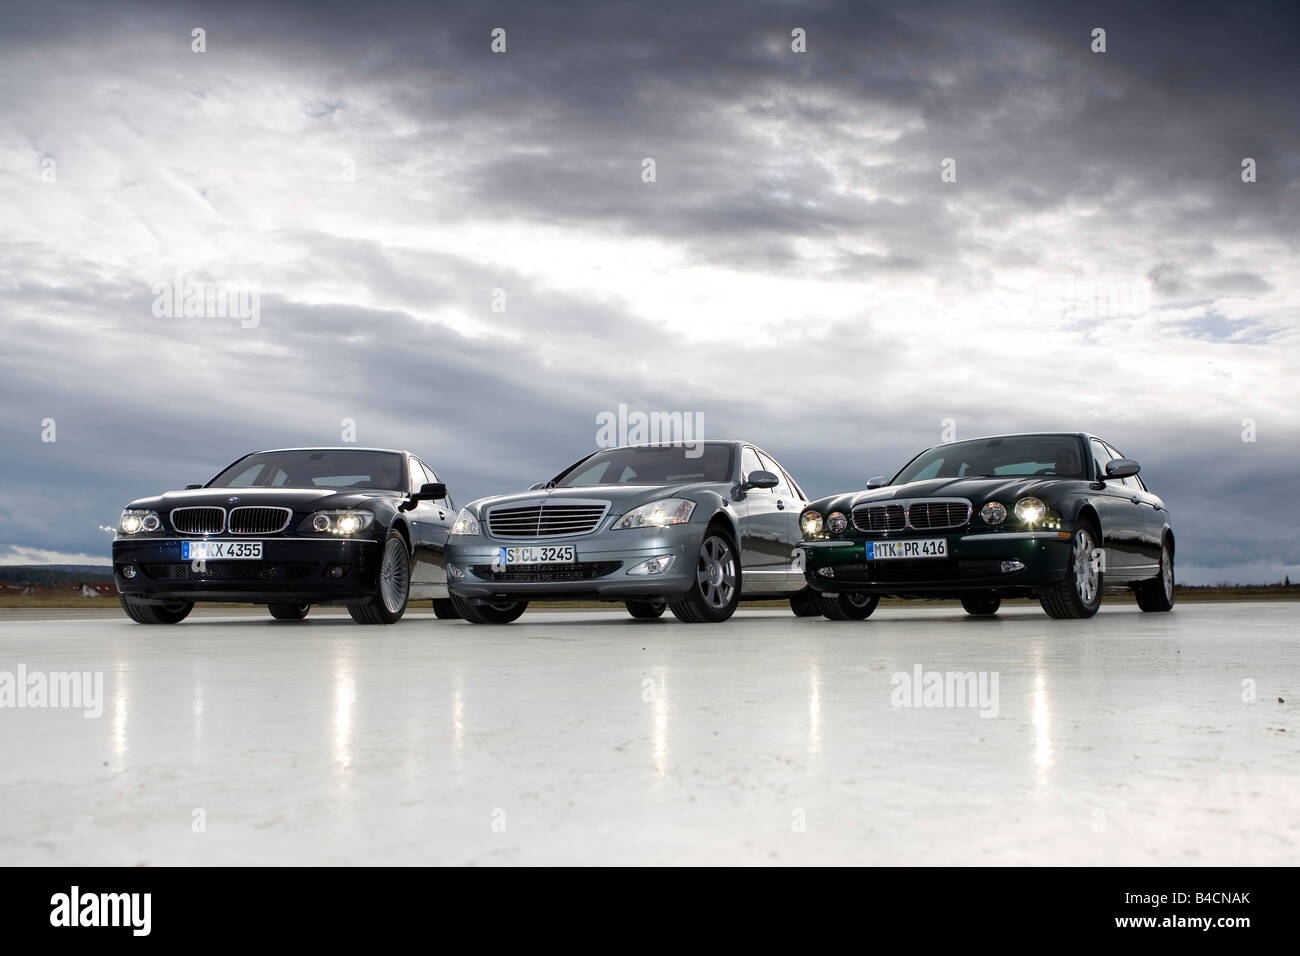 Luxury approx., Luxury cars, Luxury cars, from the left: BMW 730 d, Mercedes S 320, Jaguar XJ6, standing, upholding, diagonal fr Stock Photo